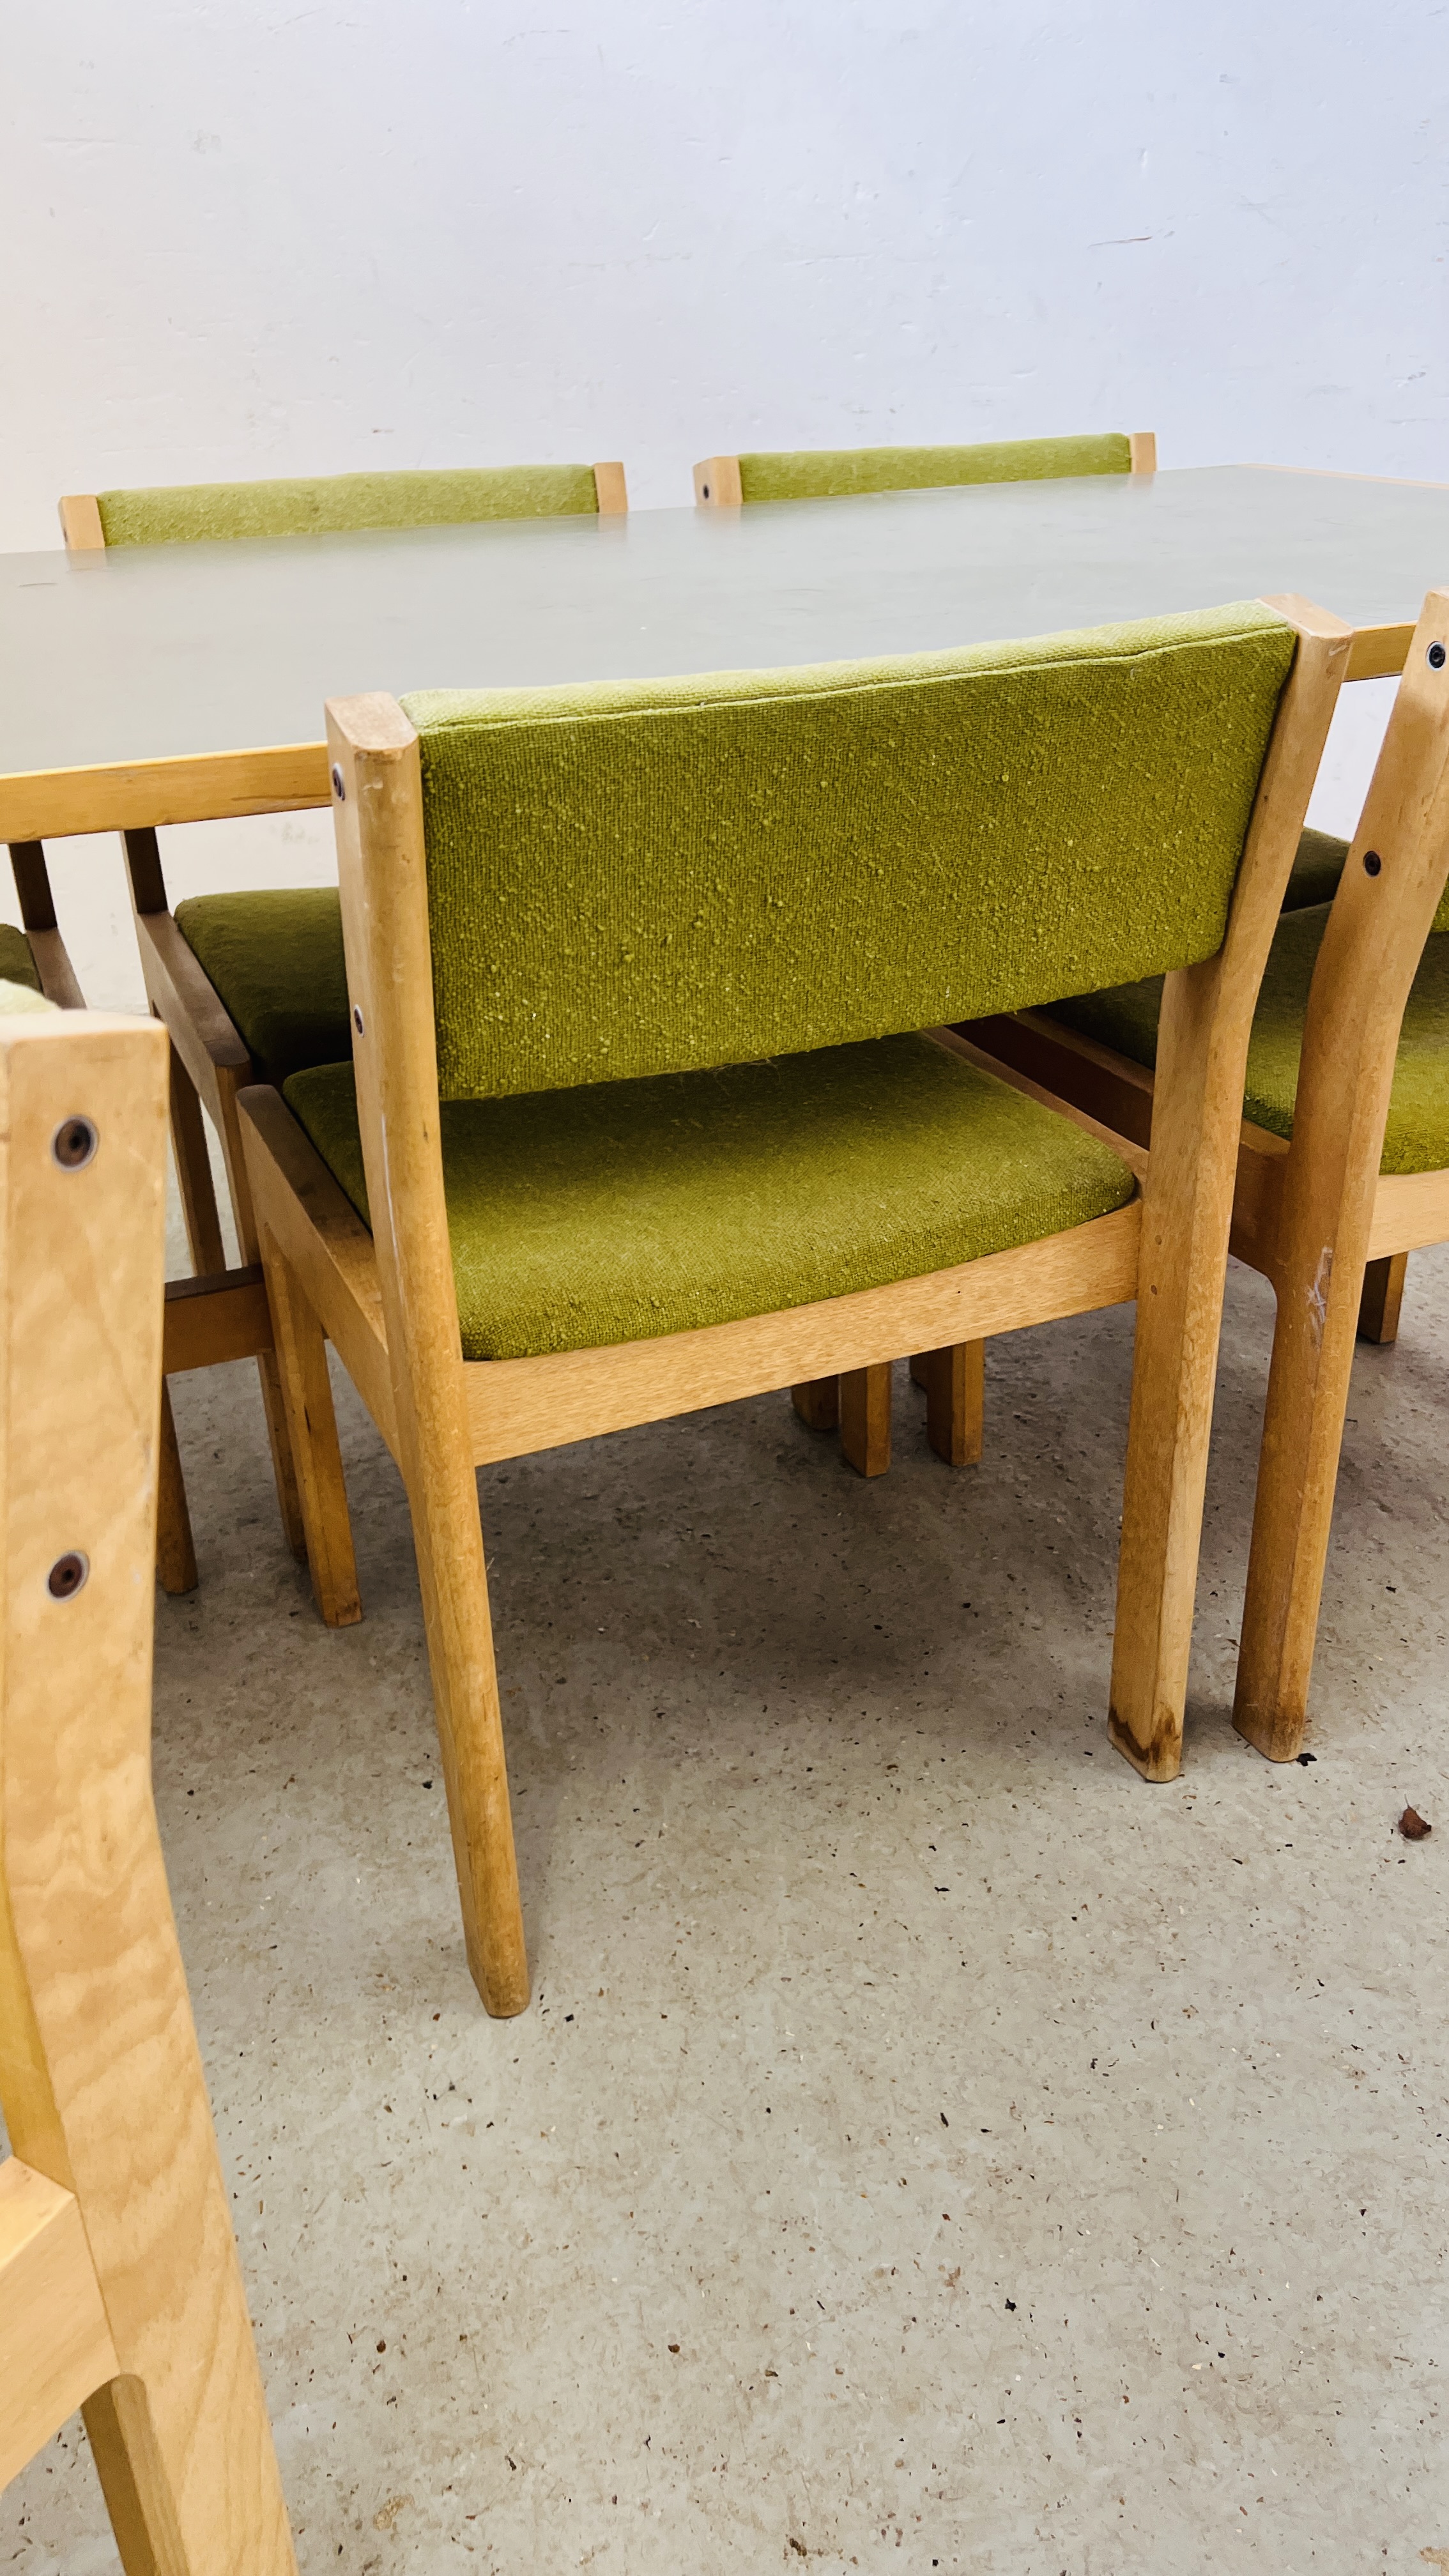 A MODERN BEECH WOOD DESK L 173CM X D 82CM X H 73CM ALONG WITH A SET OF 6 BEECH FRAMED DINING CHAIRS. - Image 10 of 10